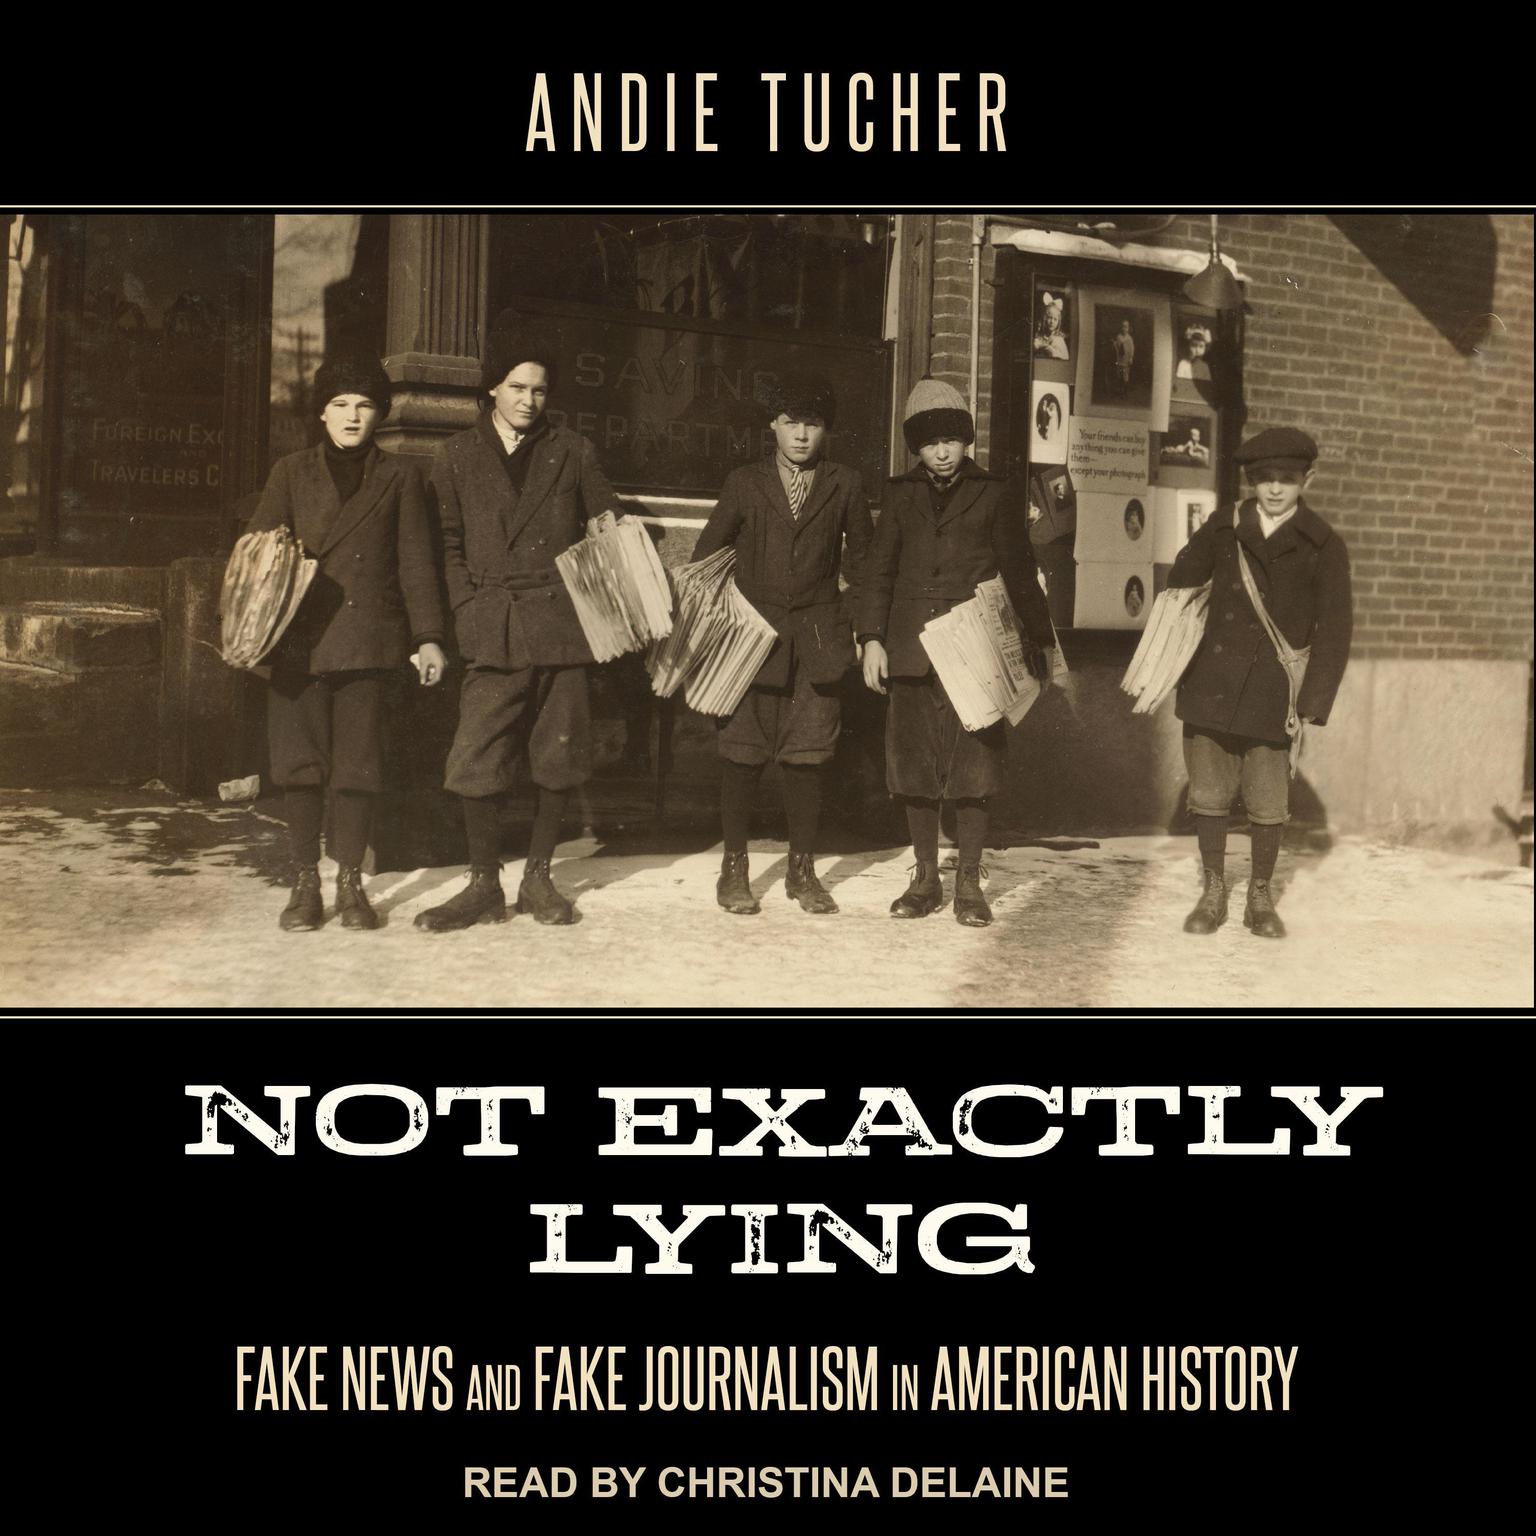 Not Exactly Lying: Fake News and Fake Journalism in American History Audiobook, by Andie Tucher